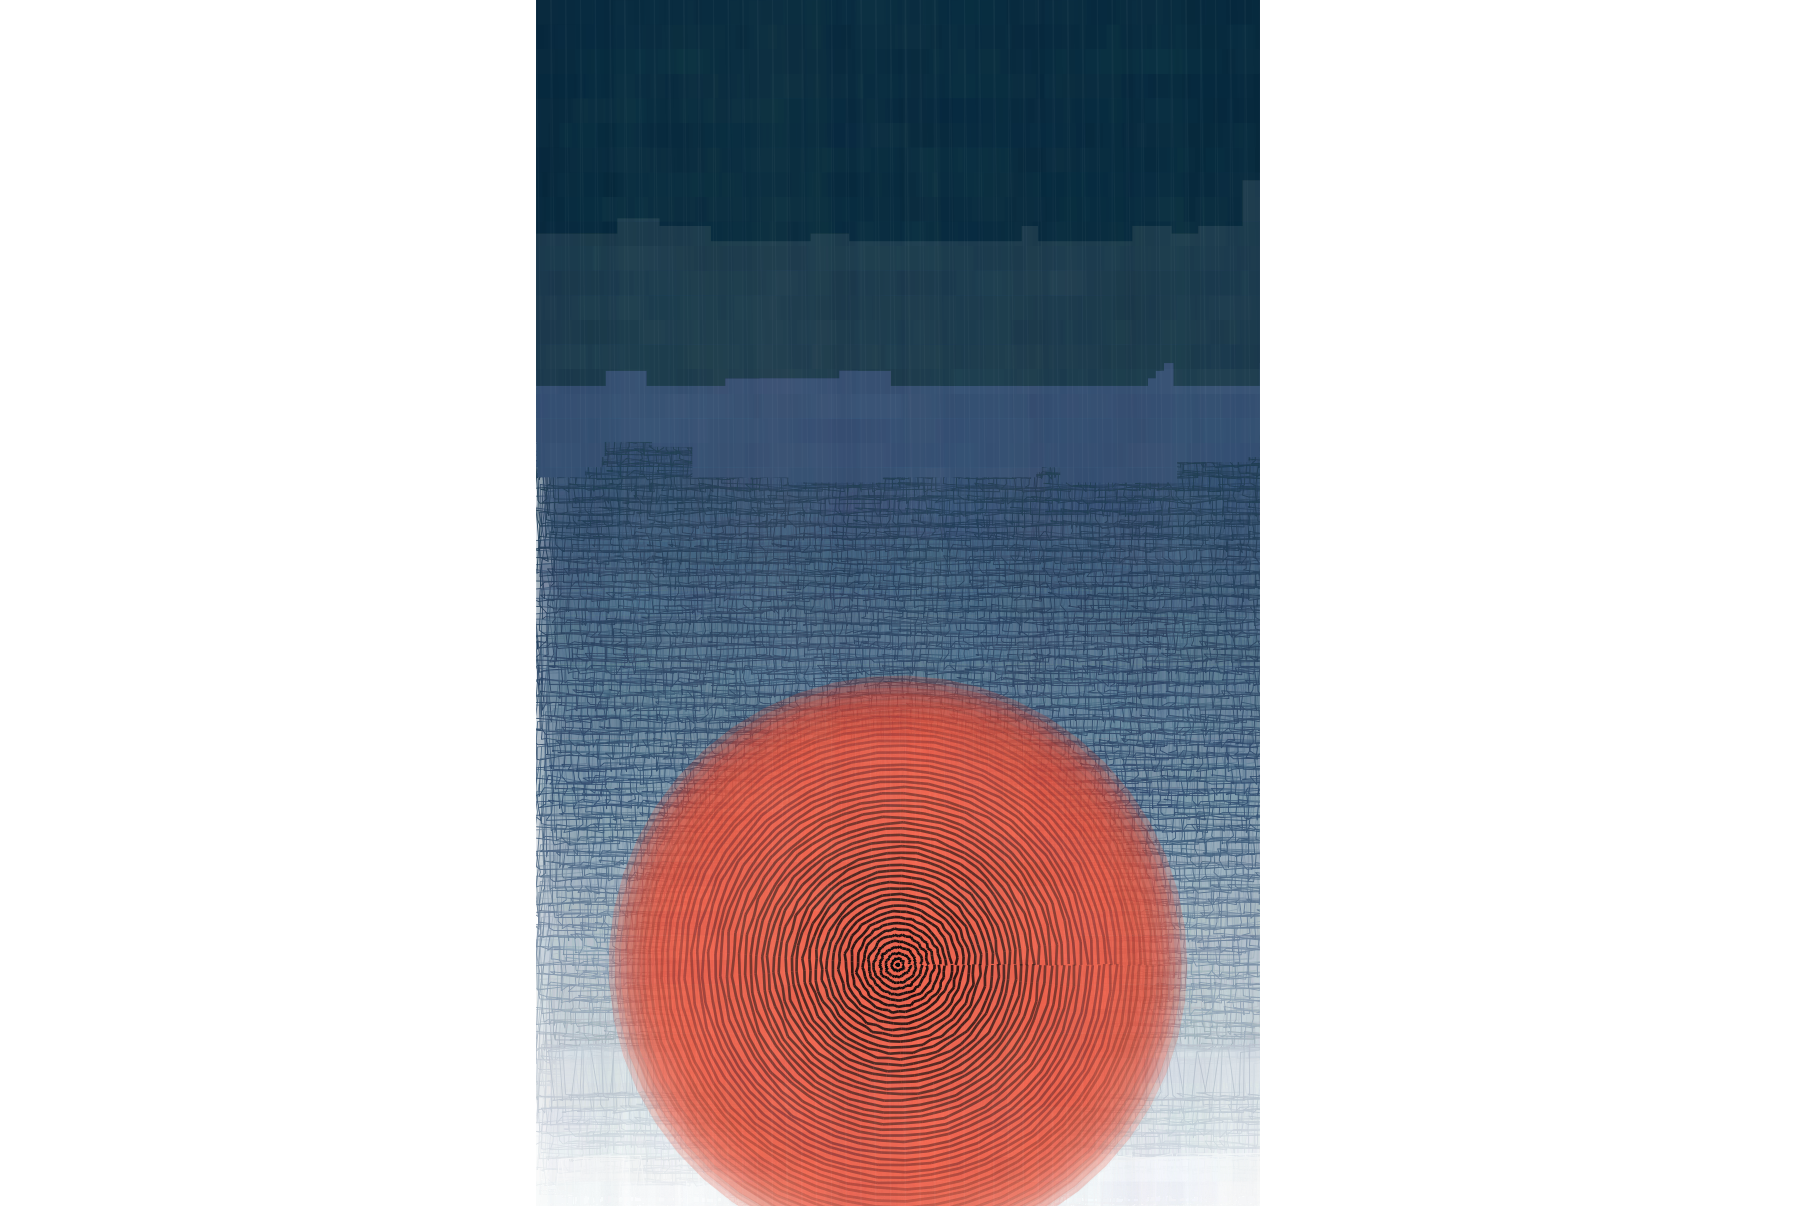 An image that samples the movie poster for Inception's color palette. three areas of blue bars are coming down from the top of the image. A jittering grid is in the background. The background color is a gradient that fades to white towards the bottom of the image. The focal point is multiple red circles of varying sizes that lie together in one big circle near the bottom of the image.